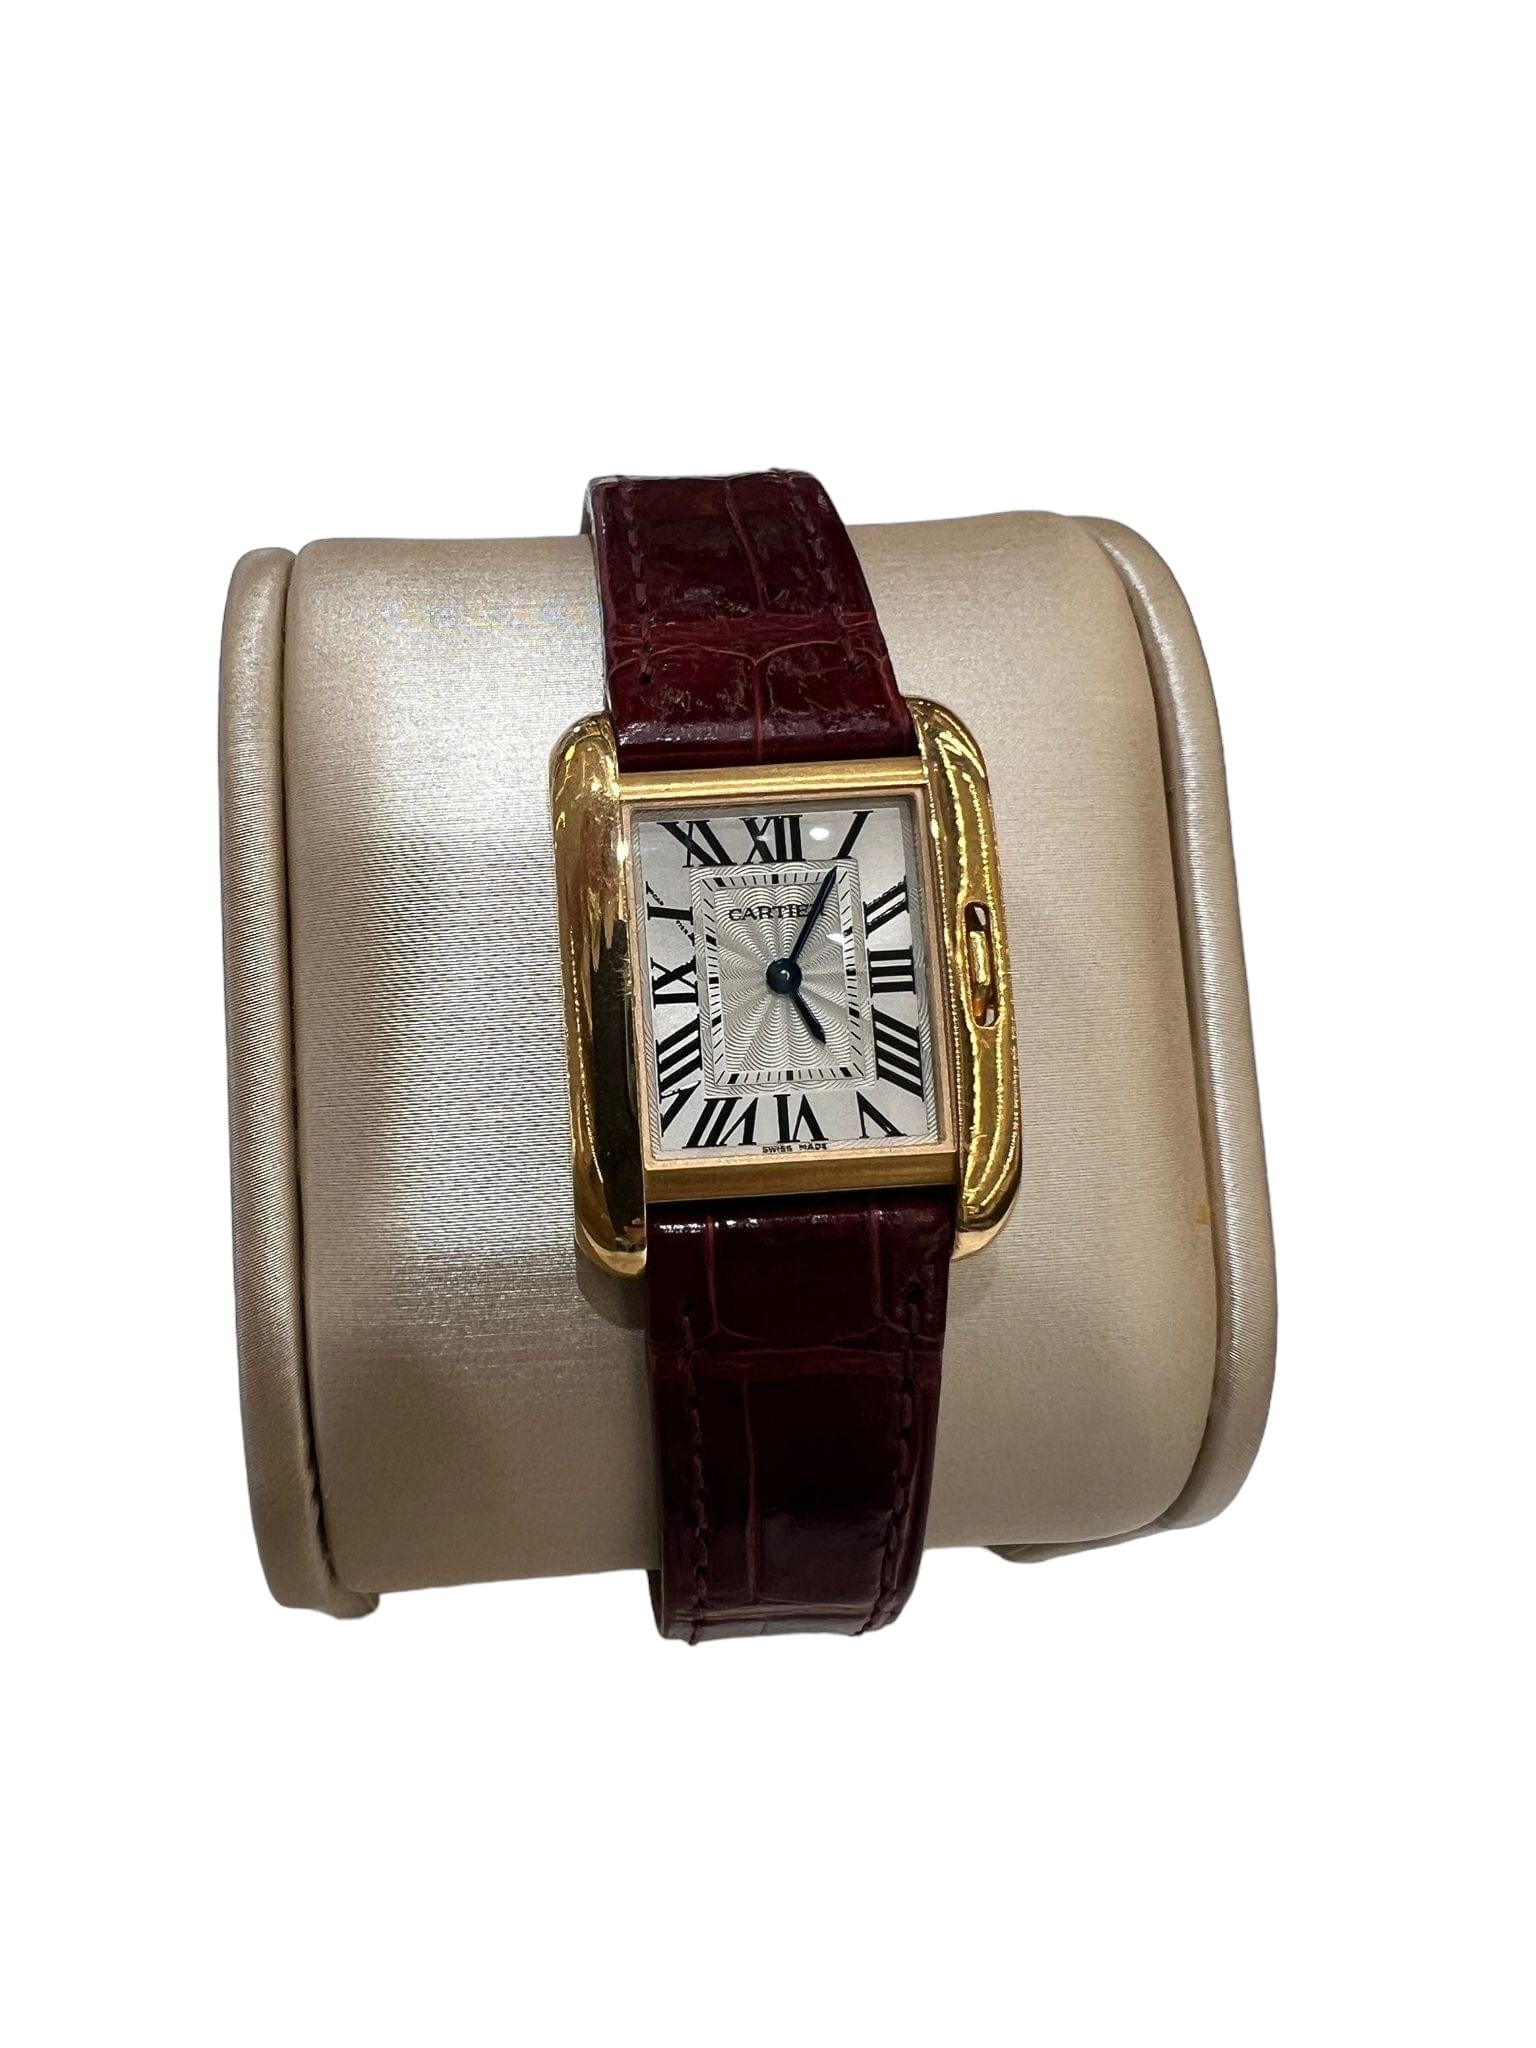 Cartier Cartier Tank Ladies Watch 18K Gold with red leather strap 23mm